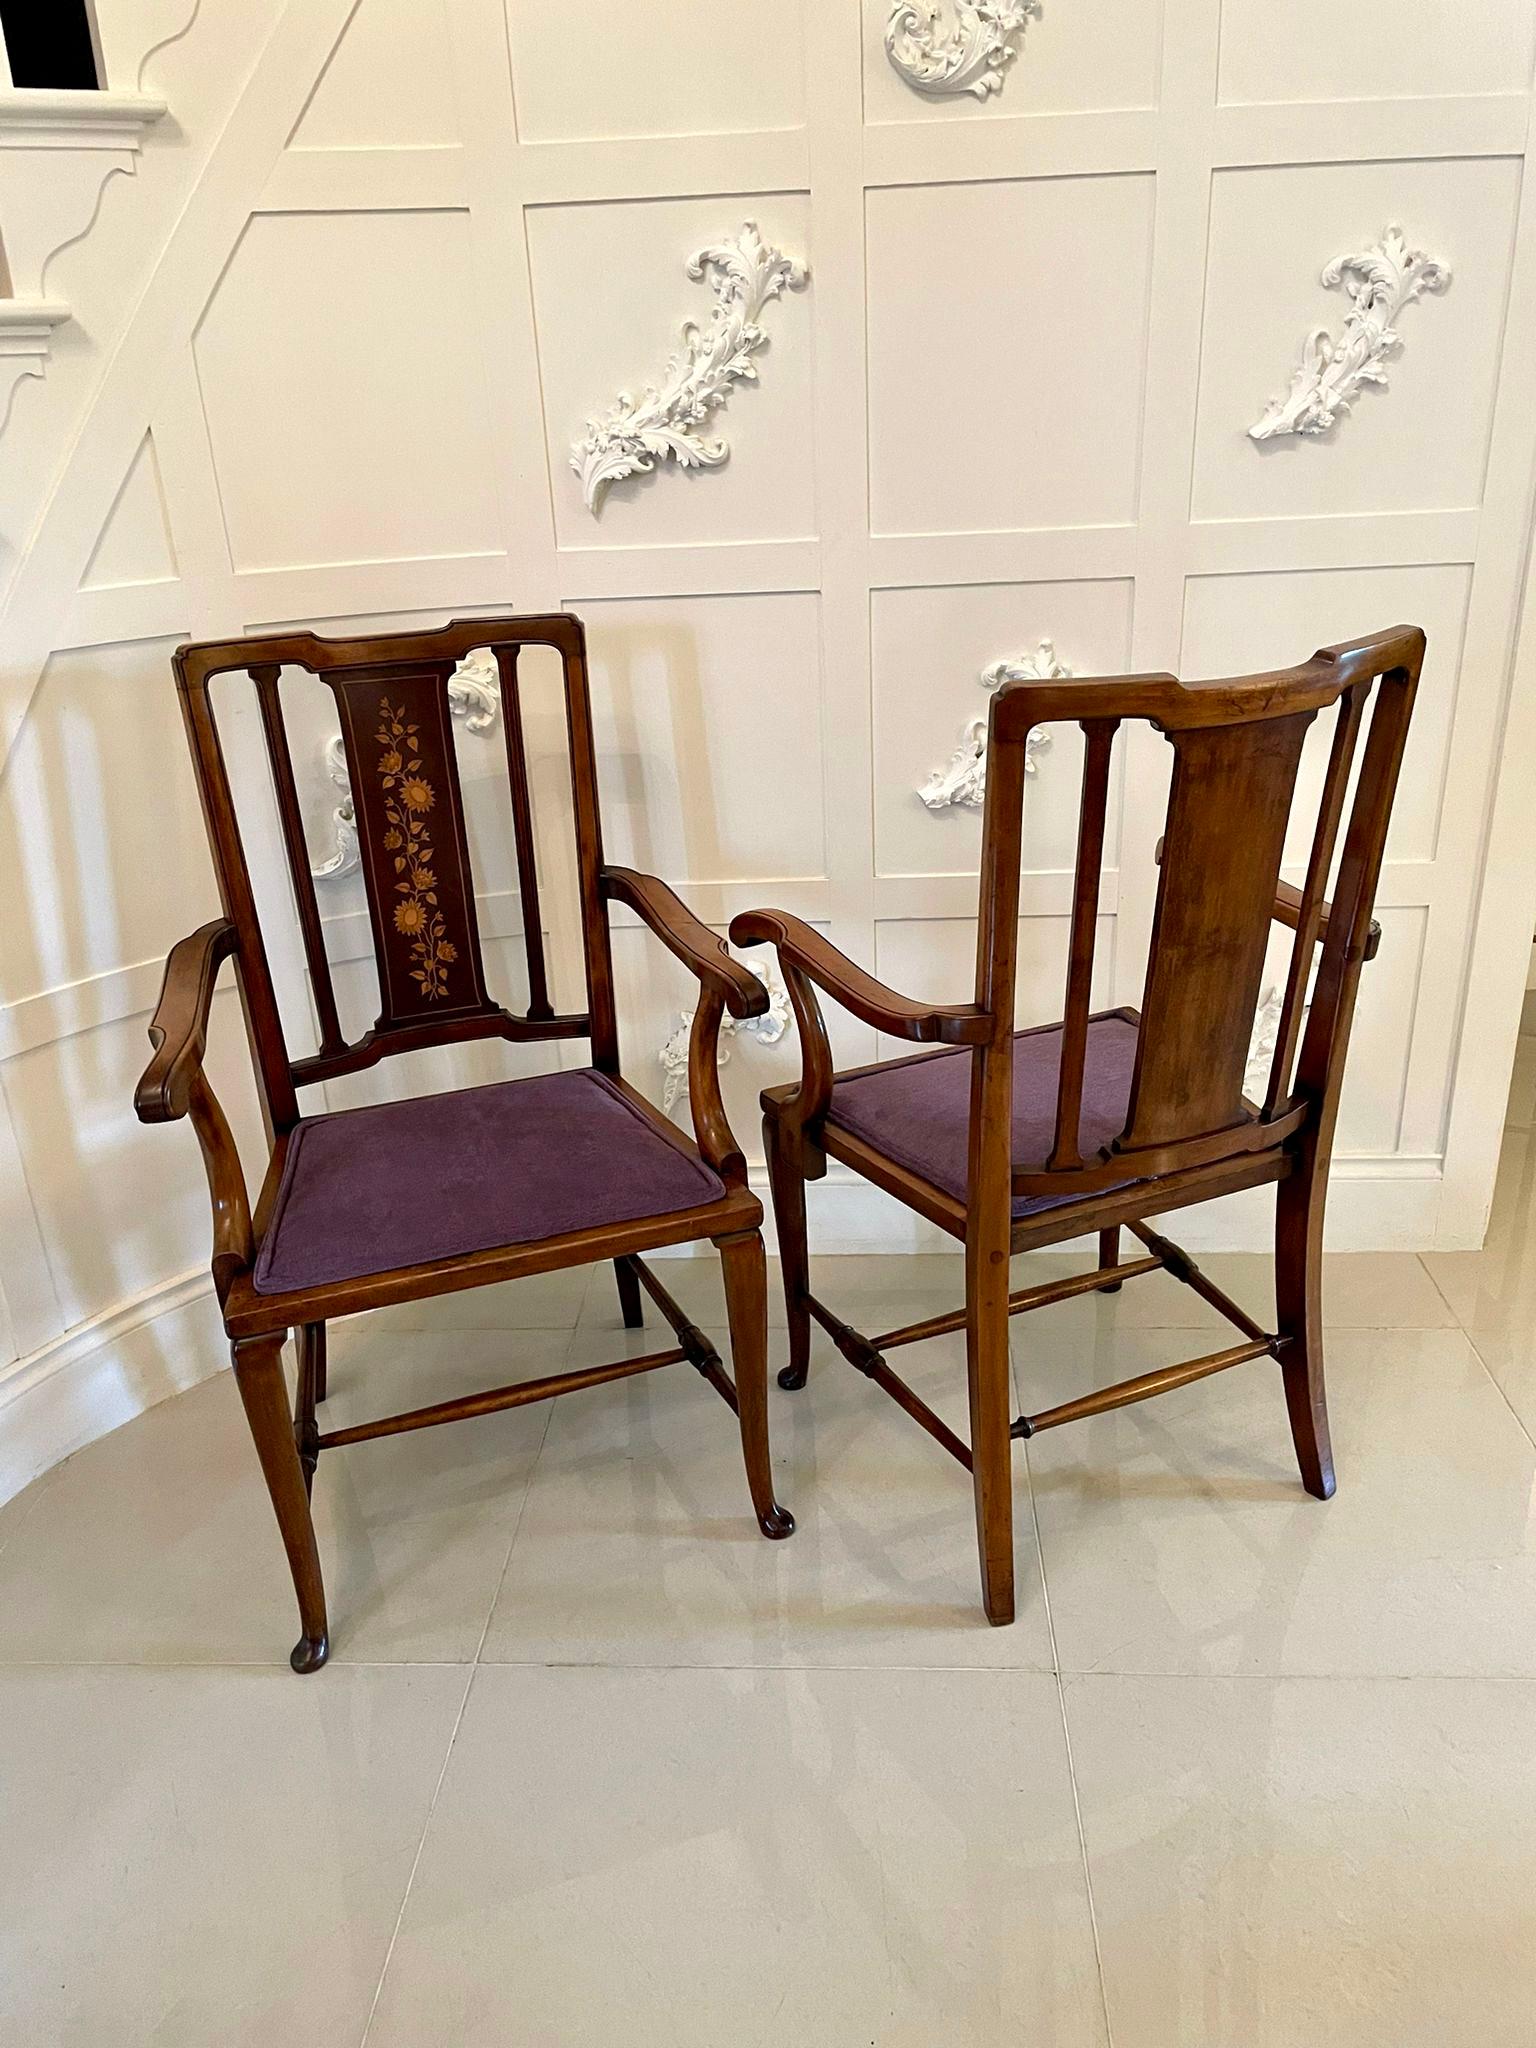 Pair of Antique Edwardian Inlaid Mahogany Desk Chairs For Sale 5